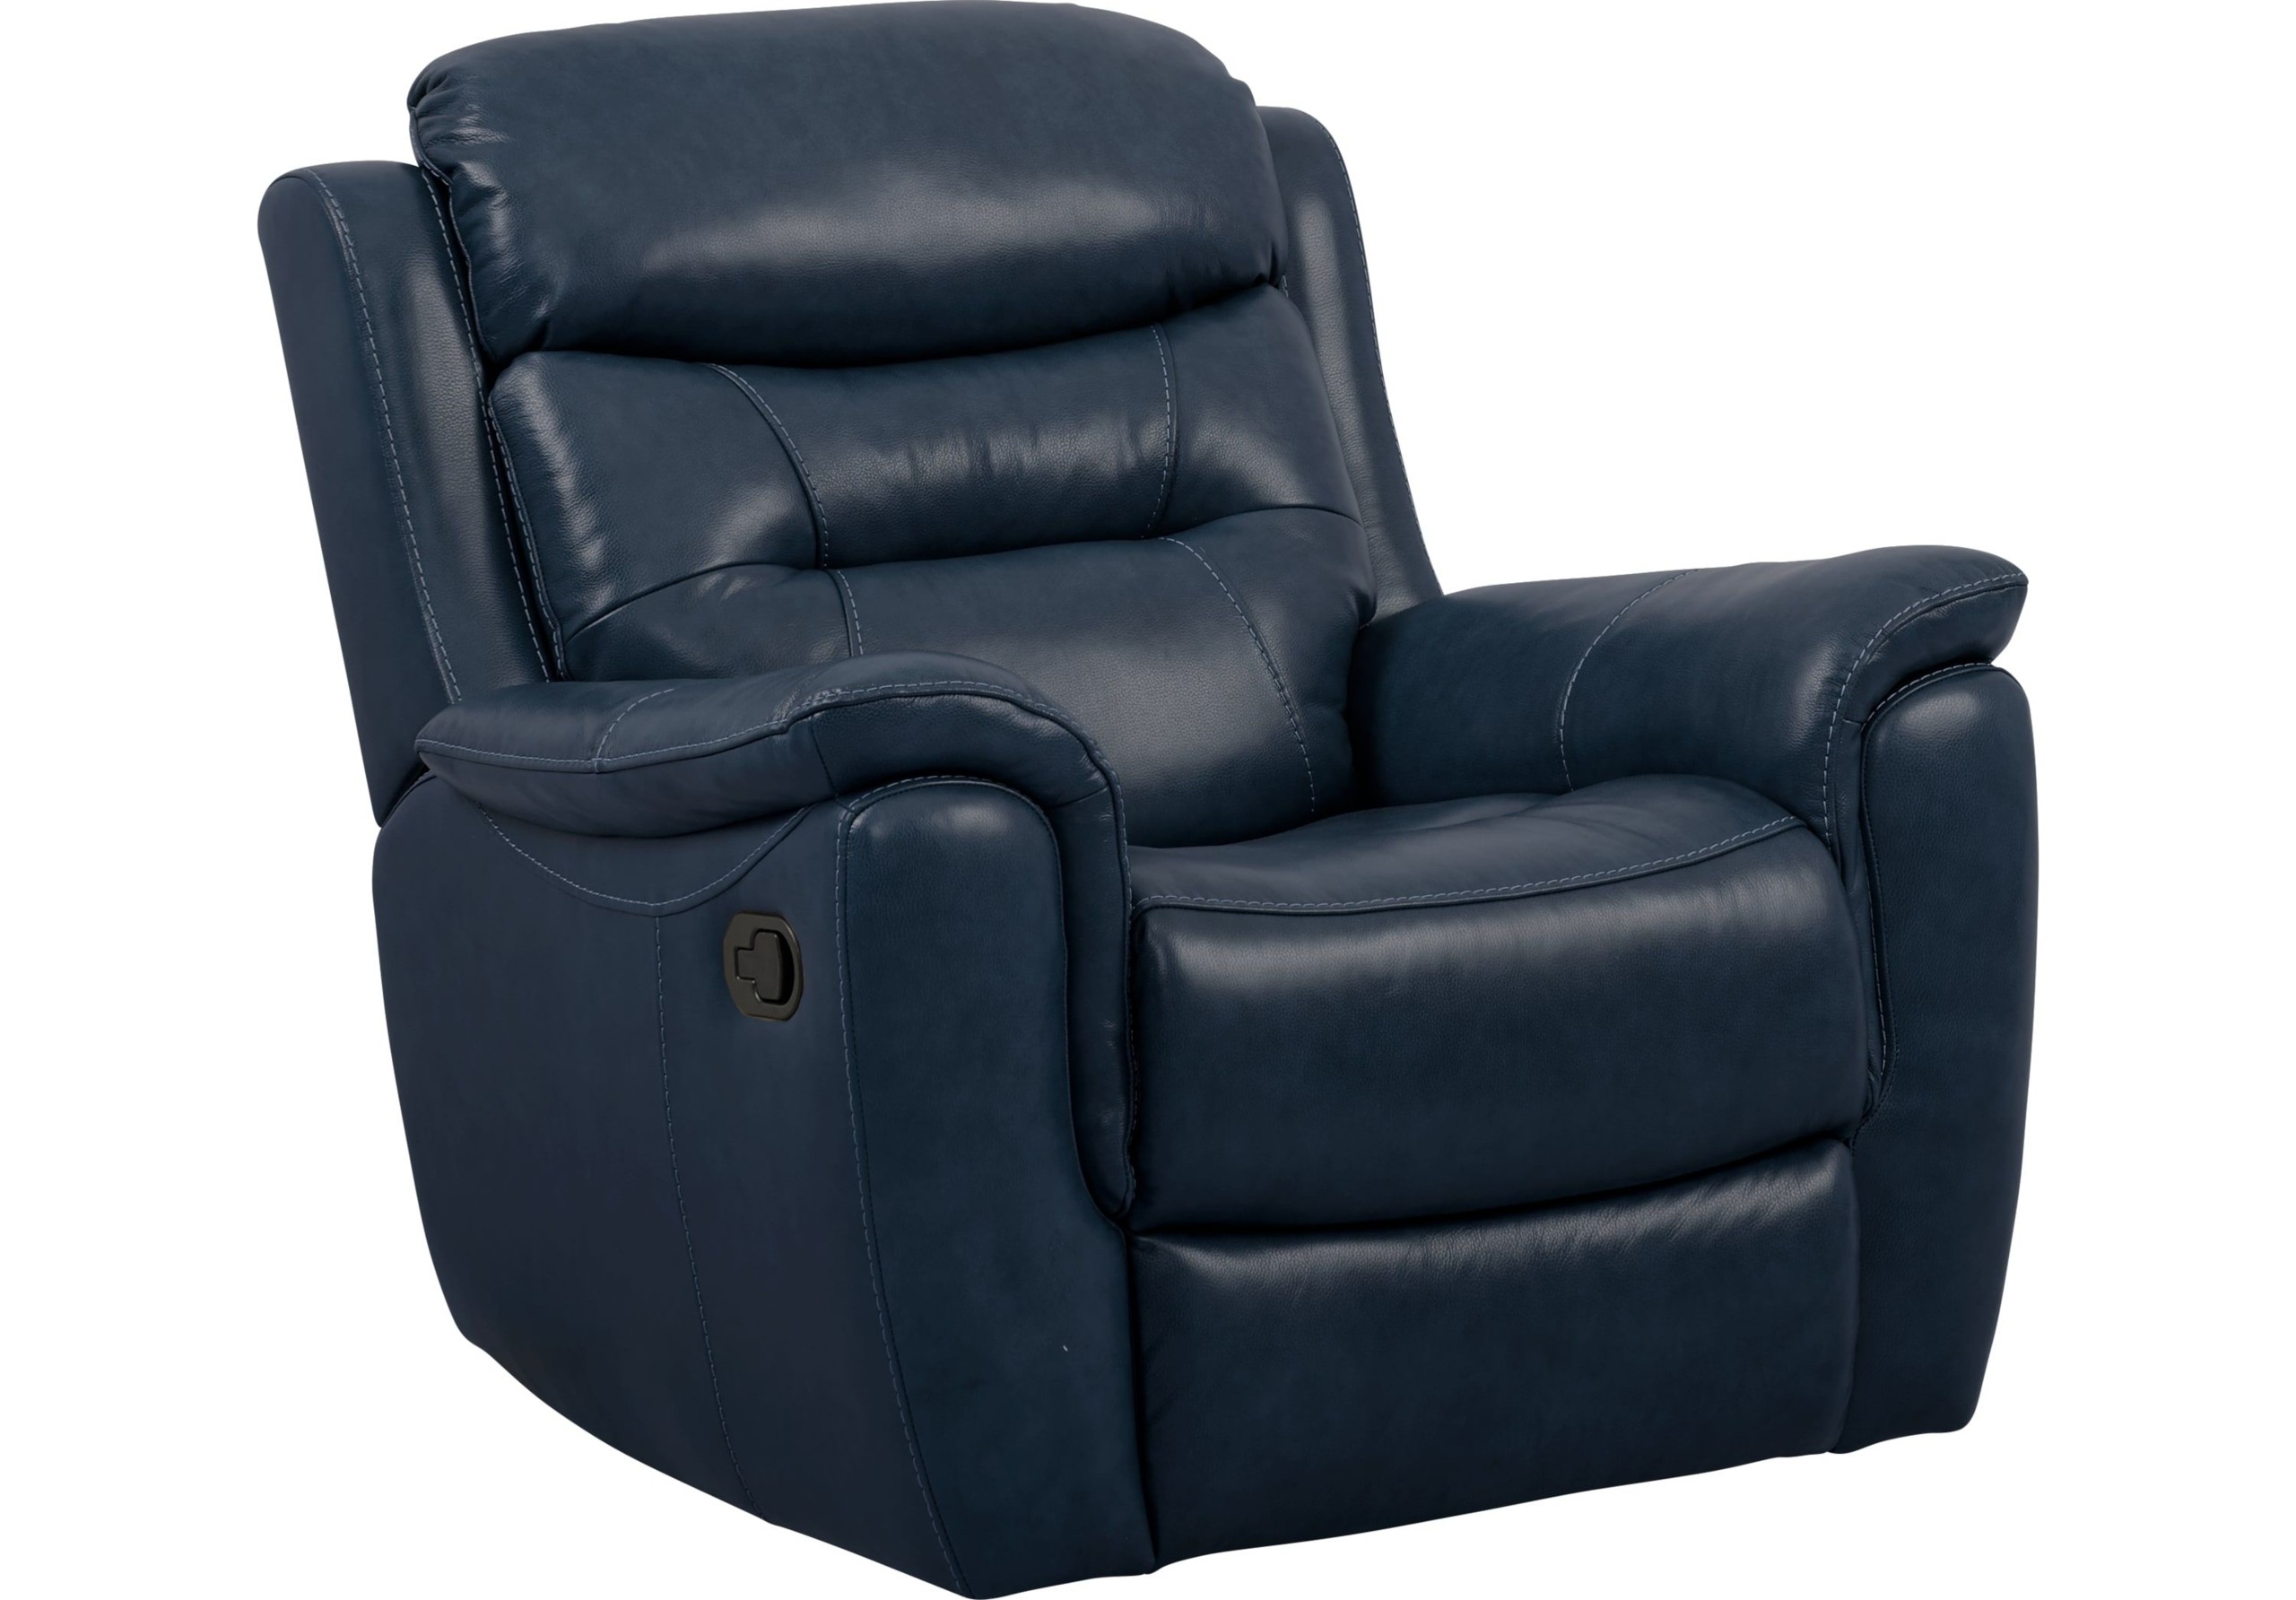 Sabella navy leather glider recliner blue leather sofa